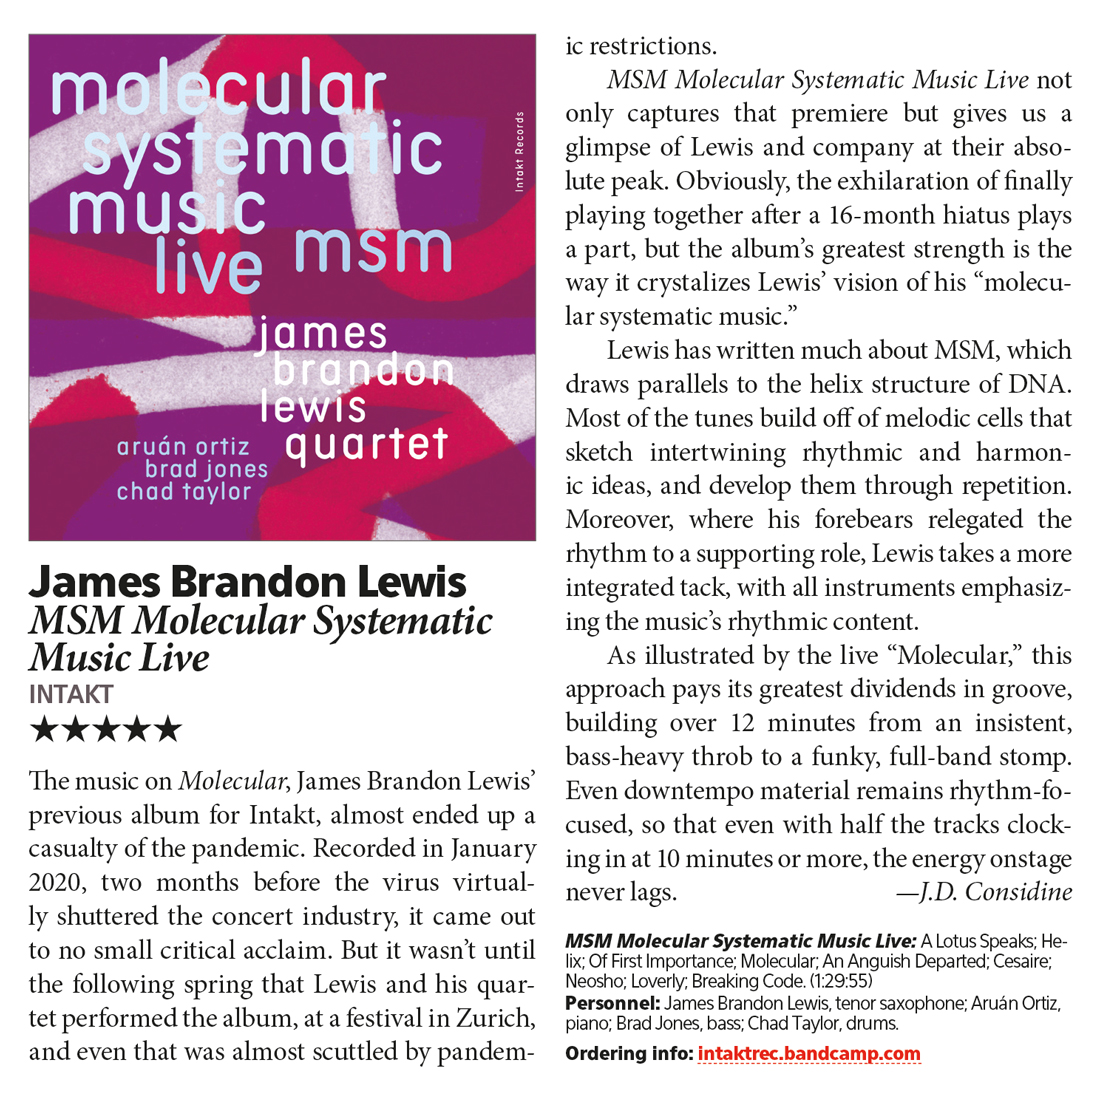 The music on Molecular, James Brandon Lewis'
								previous album for Intakt, almost ended up a
								casualty of the pandemic. Recorded in January
								2020, two months before the virus virtual.
								ly shuttered the concert industry, it came out
								to no small critical acclaim. But it wasn't until
								the following spring that Lewis and his quar-
								tet performed the album, at a festival in Zurich,
								and even that was almost scuttled by pandem-
								ic restrictions.